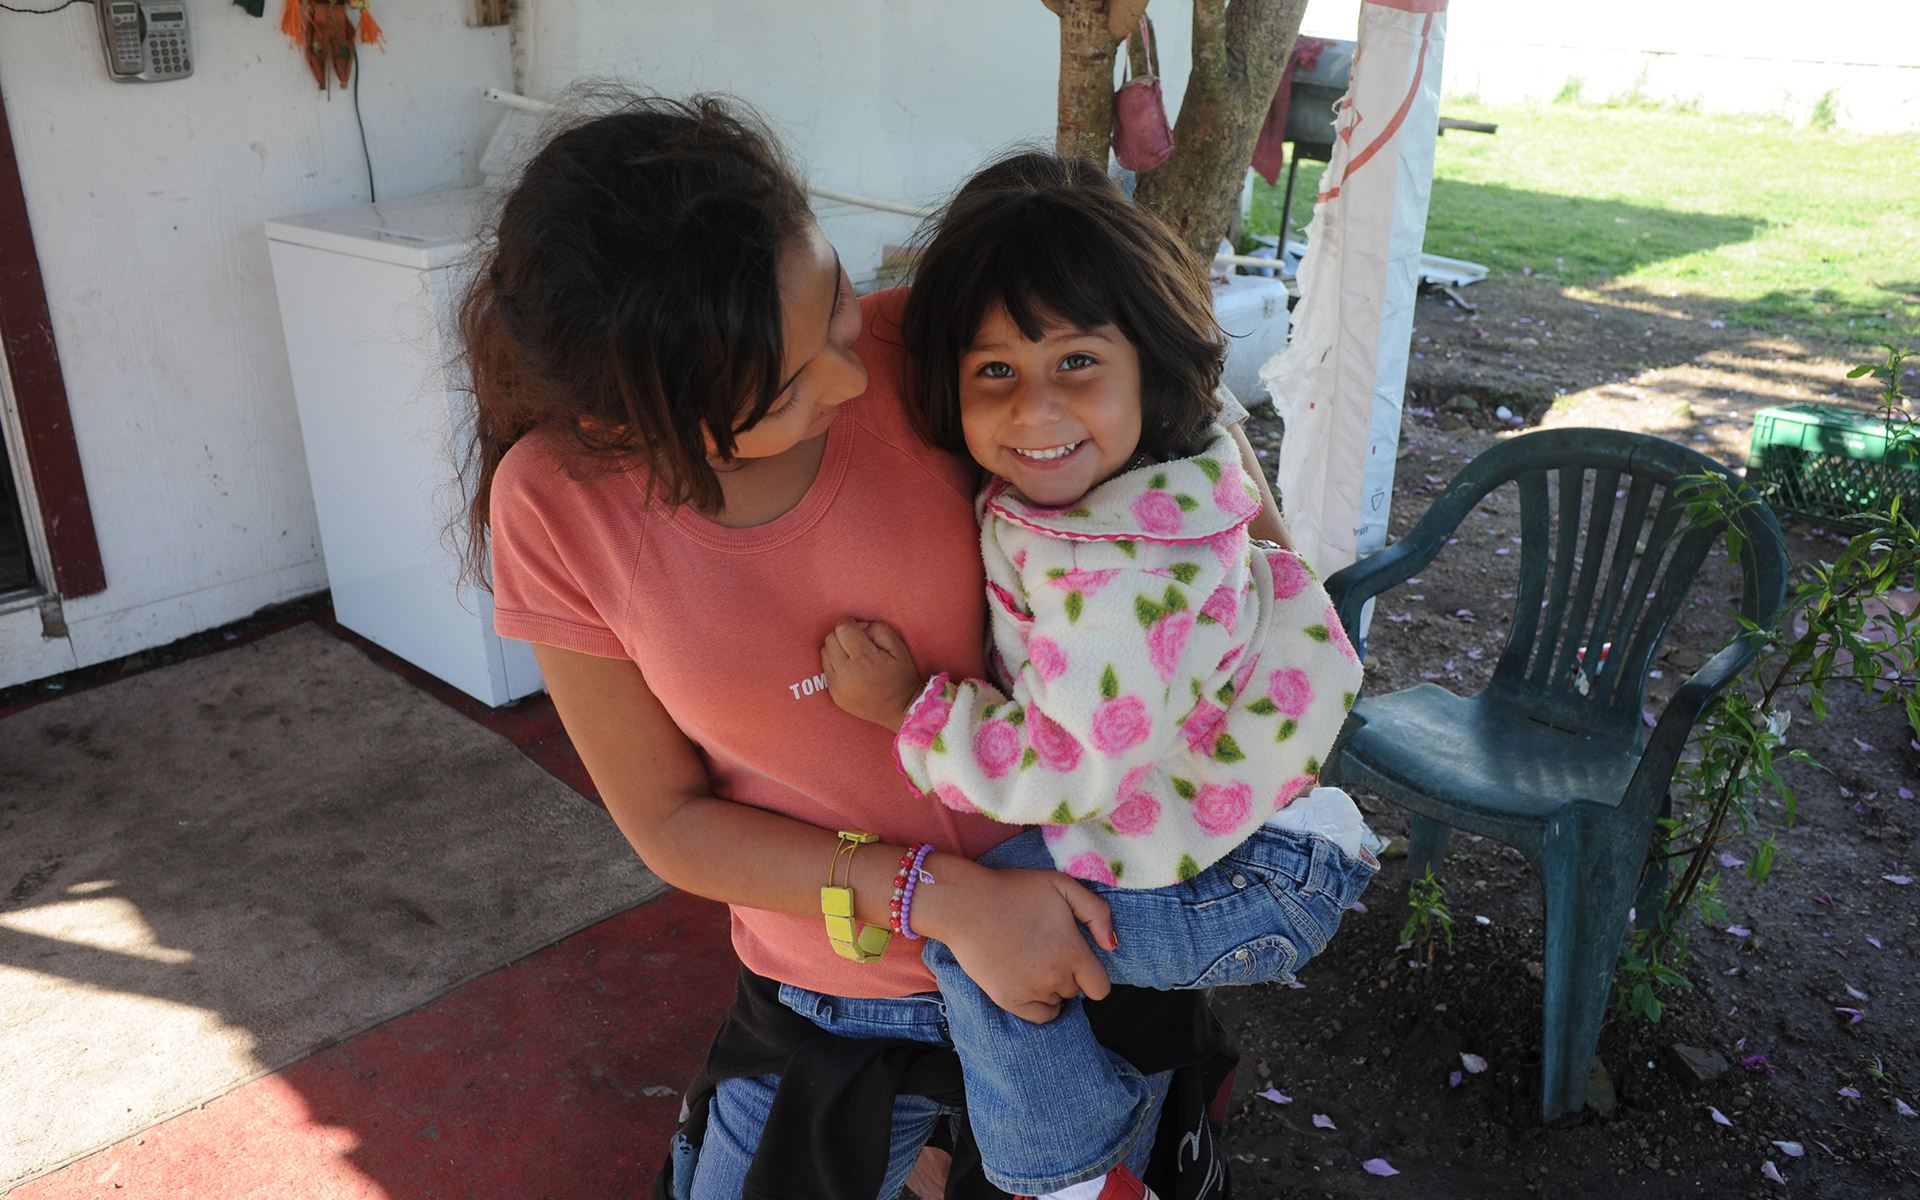 A young girl from the colonias holding her baby sister.